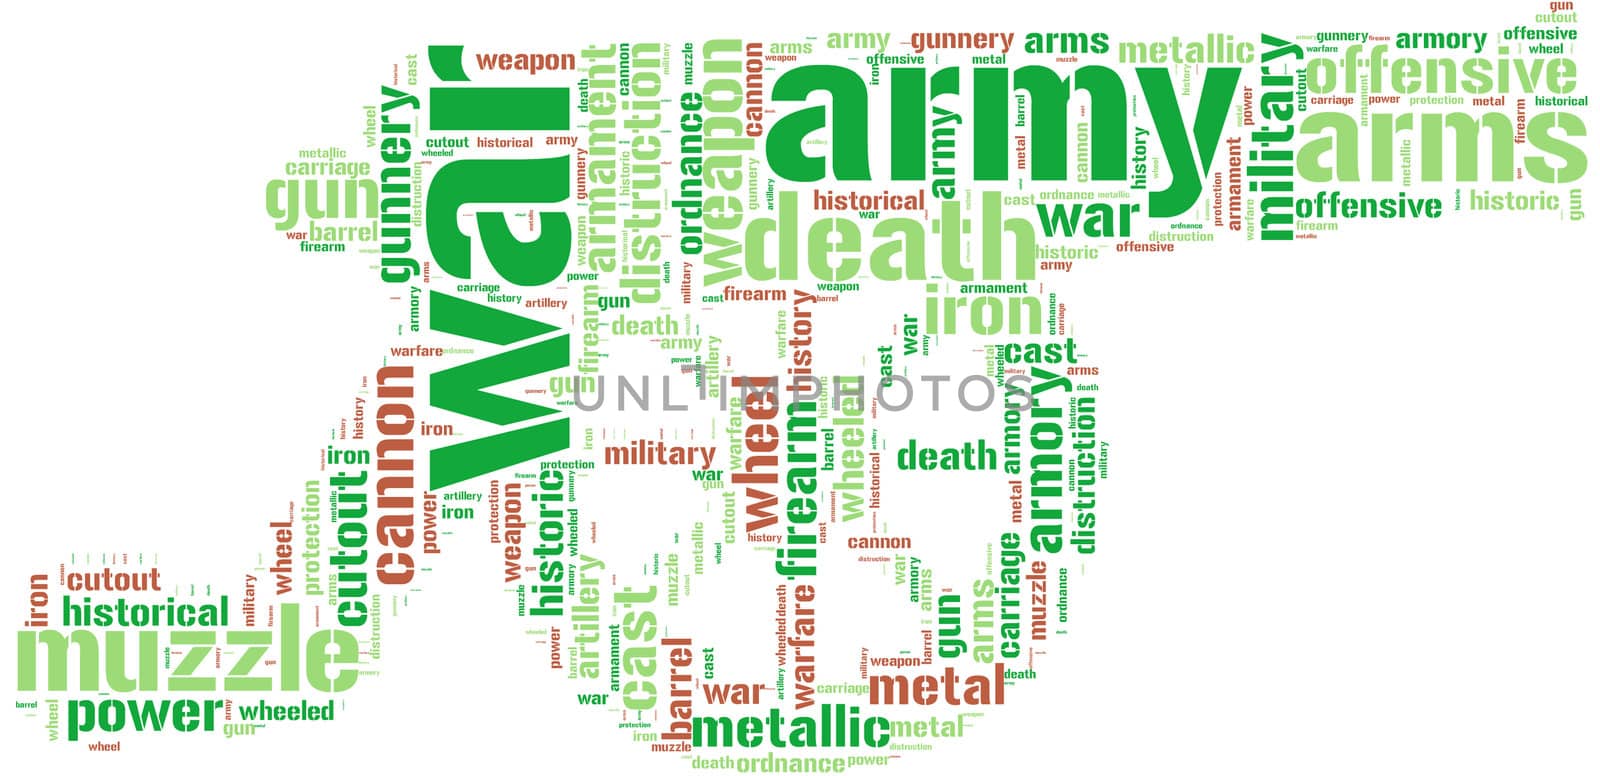 Cannon tag cloud pictogram with green words on a white background